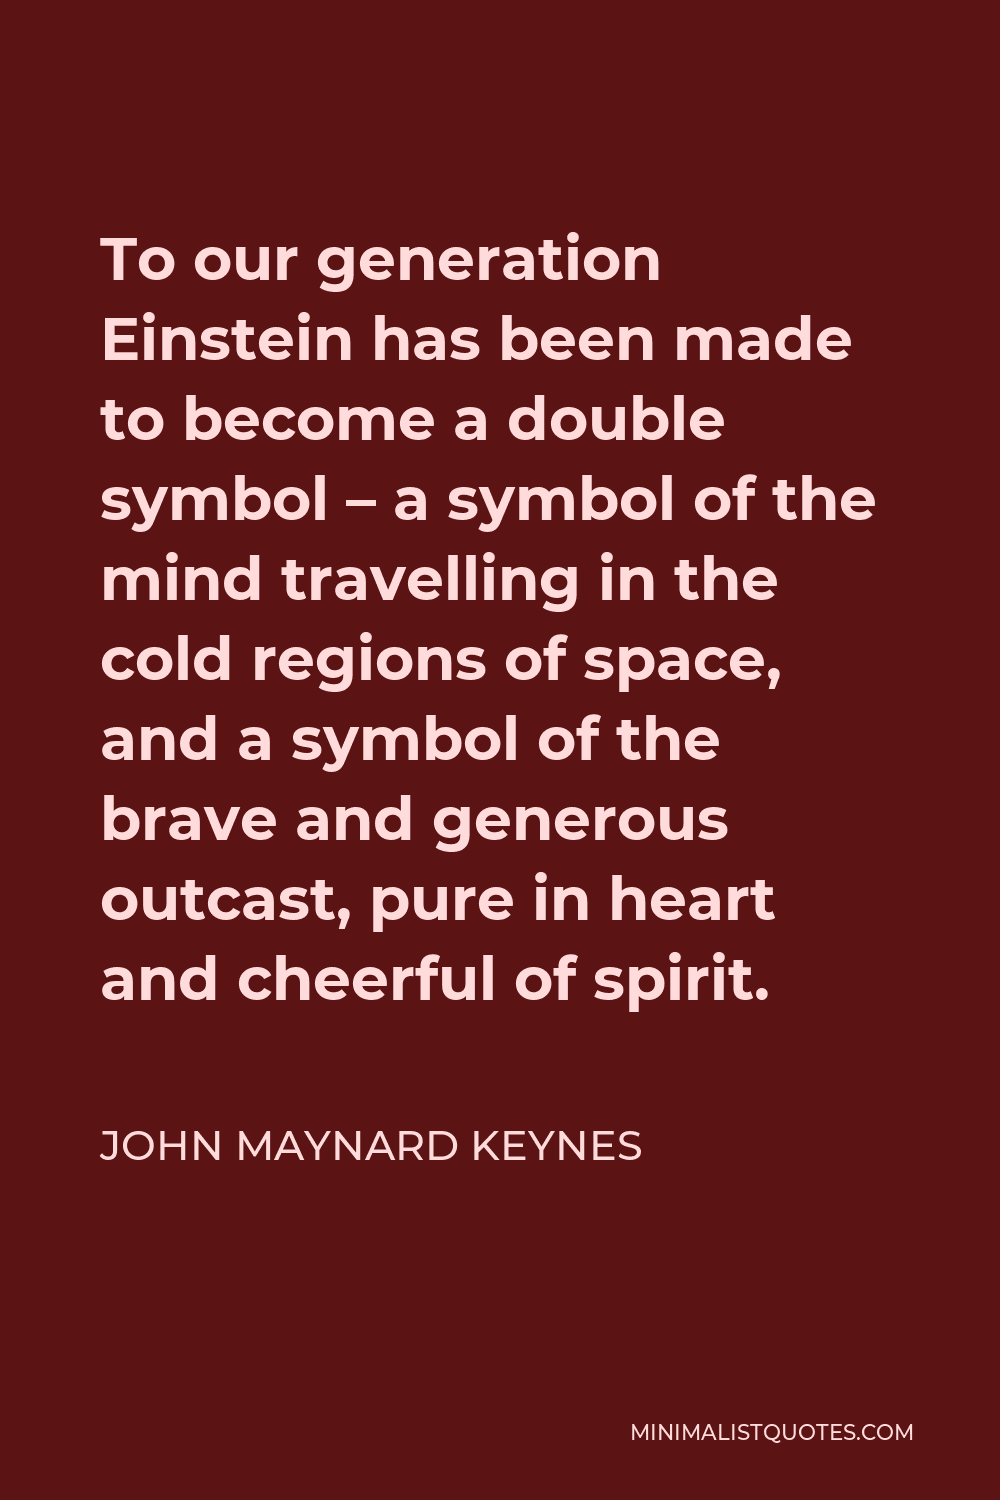 John Maynard Keynes Quote - To our generation Einstein has been made to become a double symbol – a symbol of the mind travelling in the cold regions of space, and a symbol of the brave and generous outcast, pure in heart and cheerful of spirit.